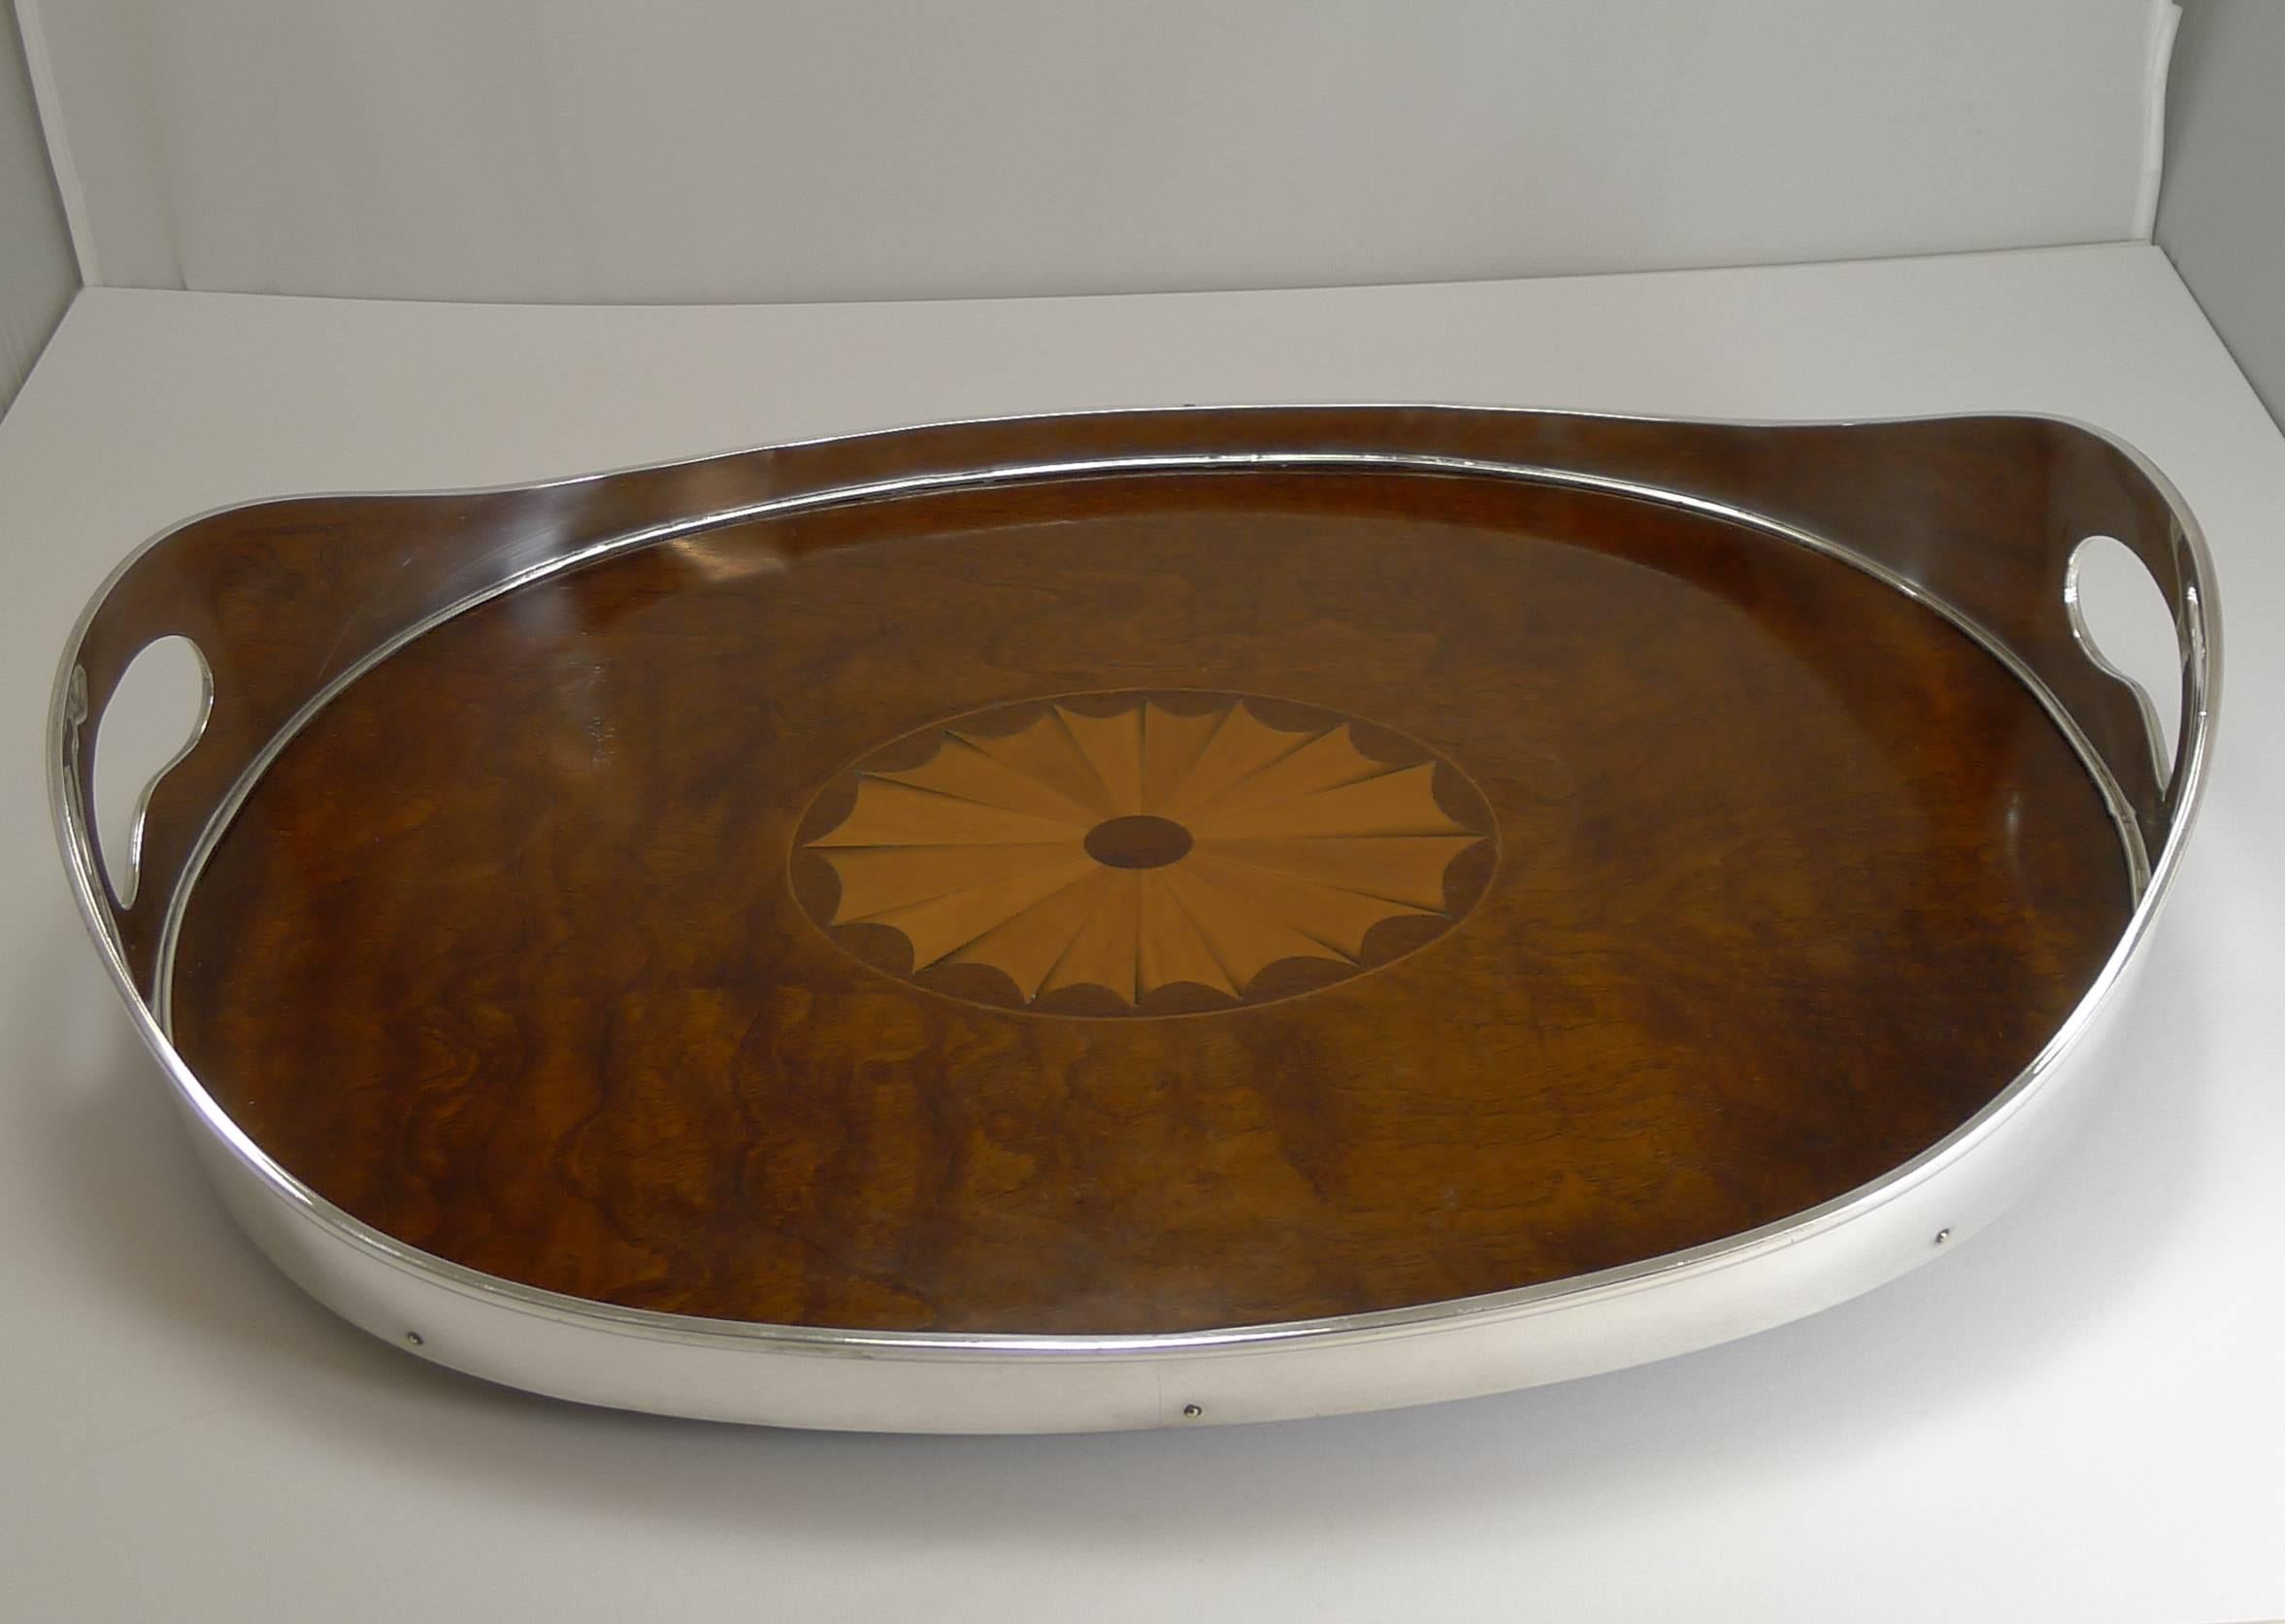 A fabulous look for any home, perfect for the traditionalist and simple and elegant for the contemporary interior.

Made from stained mahogany and inlaid with a splendid large fan motif, dating the tray to circa 1890-1900, late Victorian or